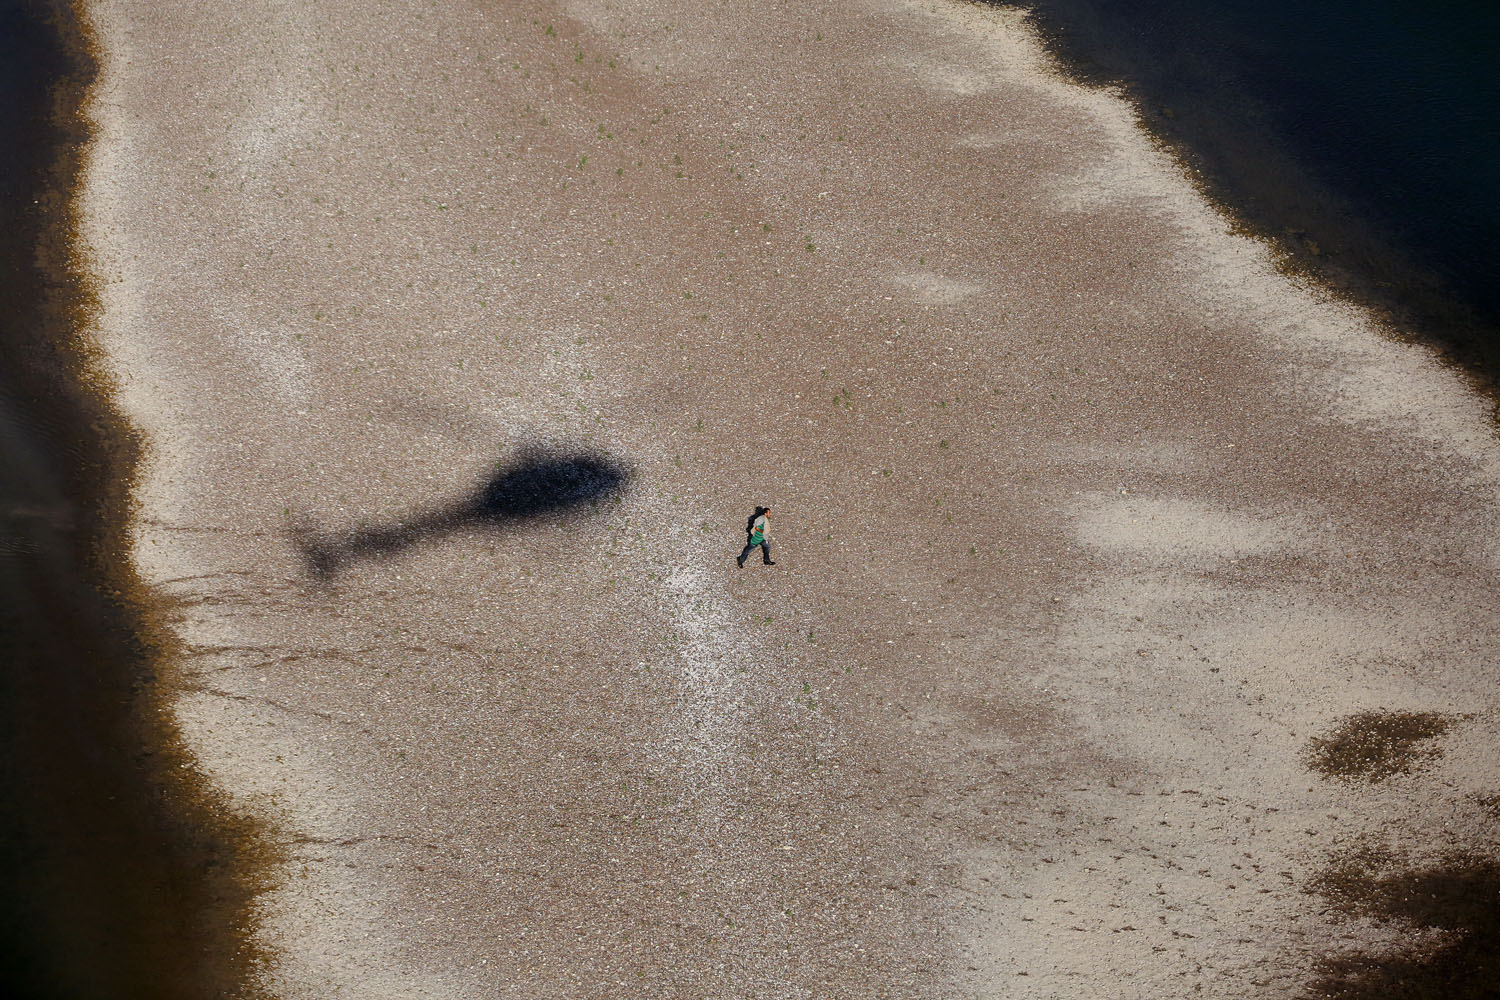 A suspected migrant runs back to Miguel Aleman, Mexico after being pursued by agents near Roma, Texas. Oct. 8, 2014.